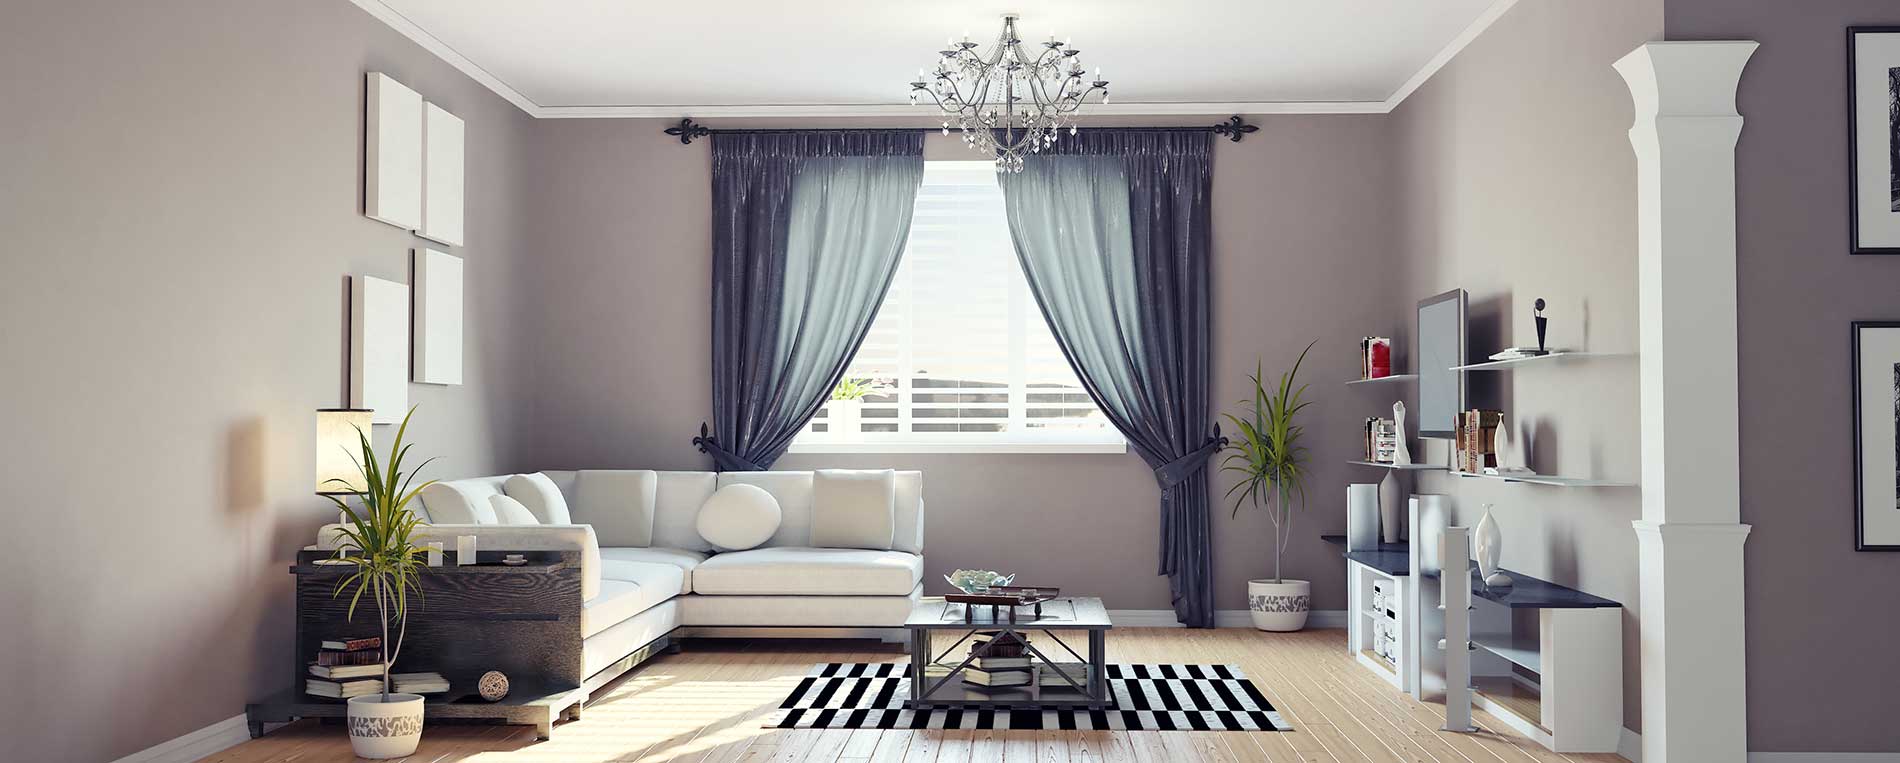 Custom Curtains and Blinds In Millbrae